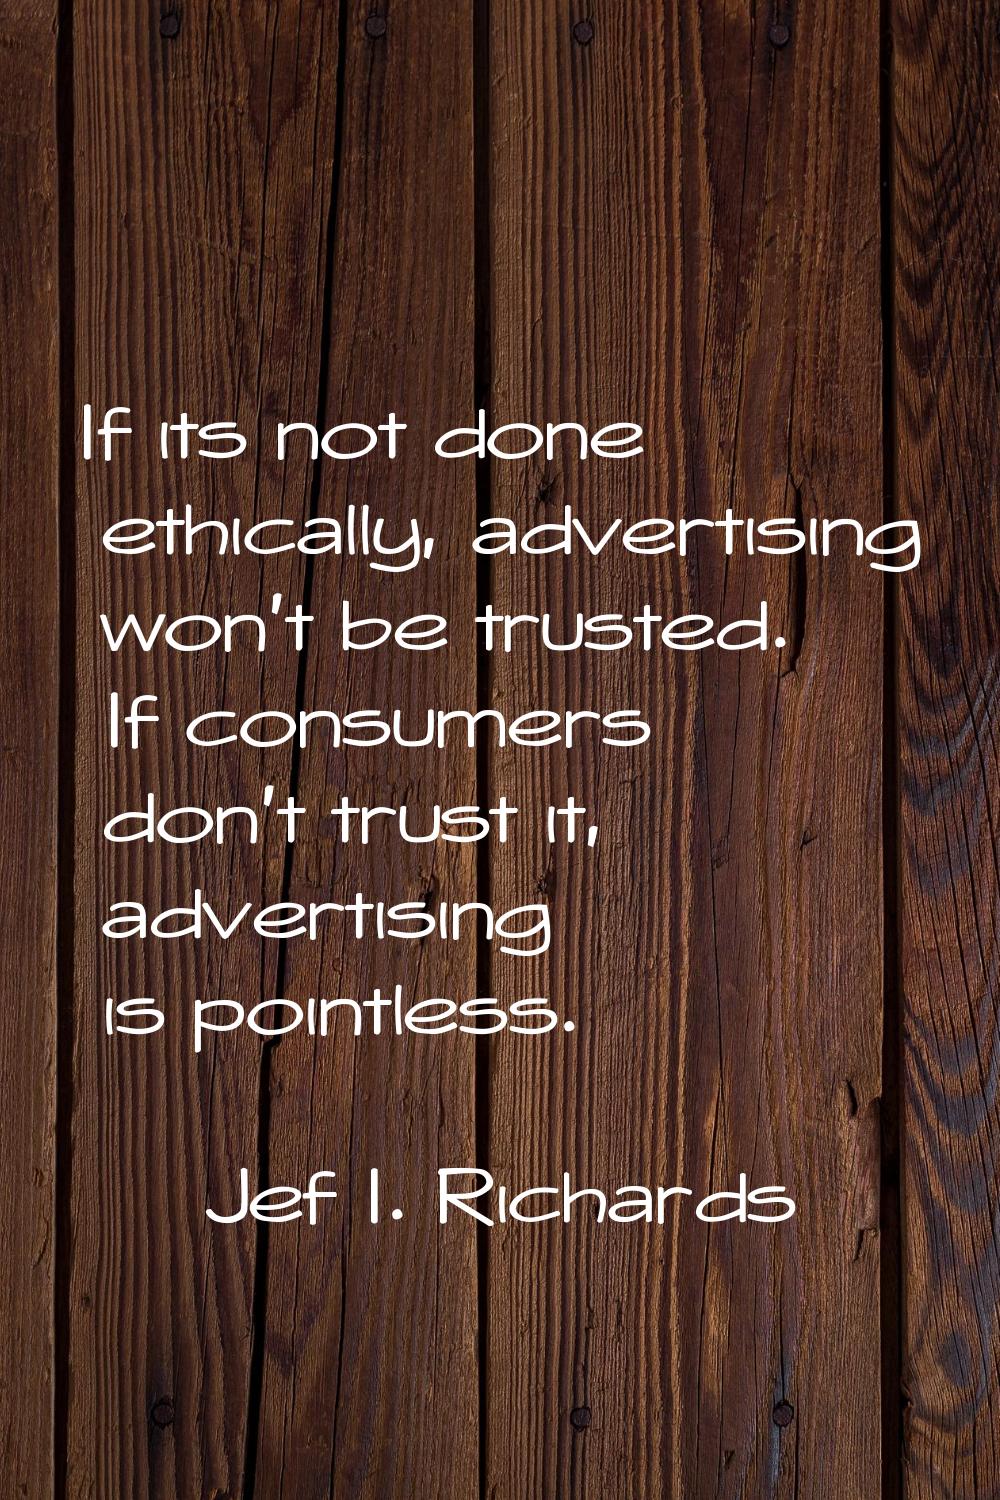 If its not done ethically, advertising won't be trusted. If consumers don't trust it, advertising i